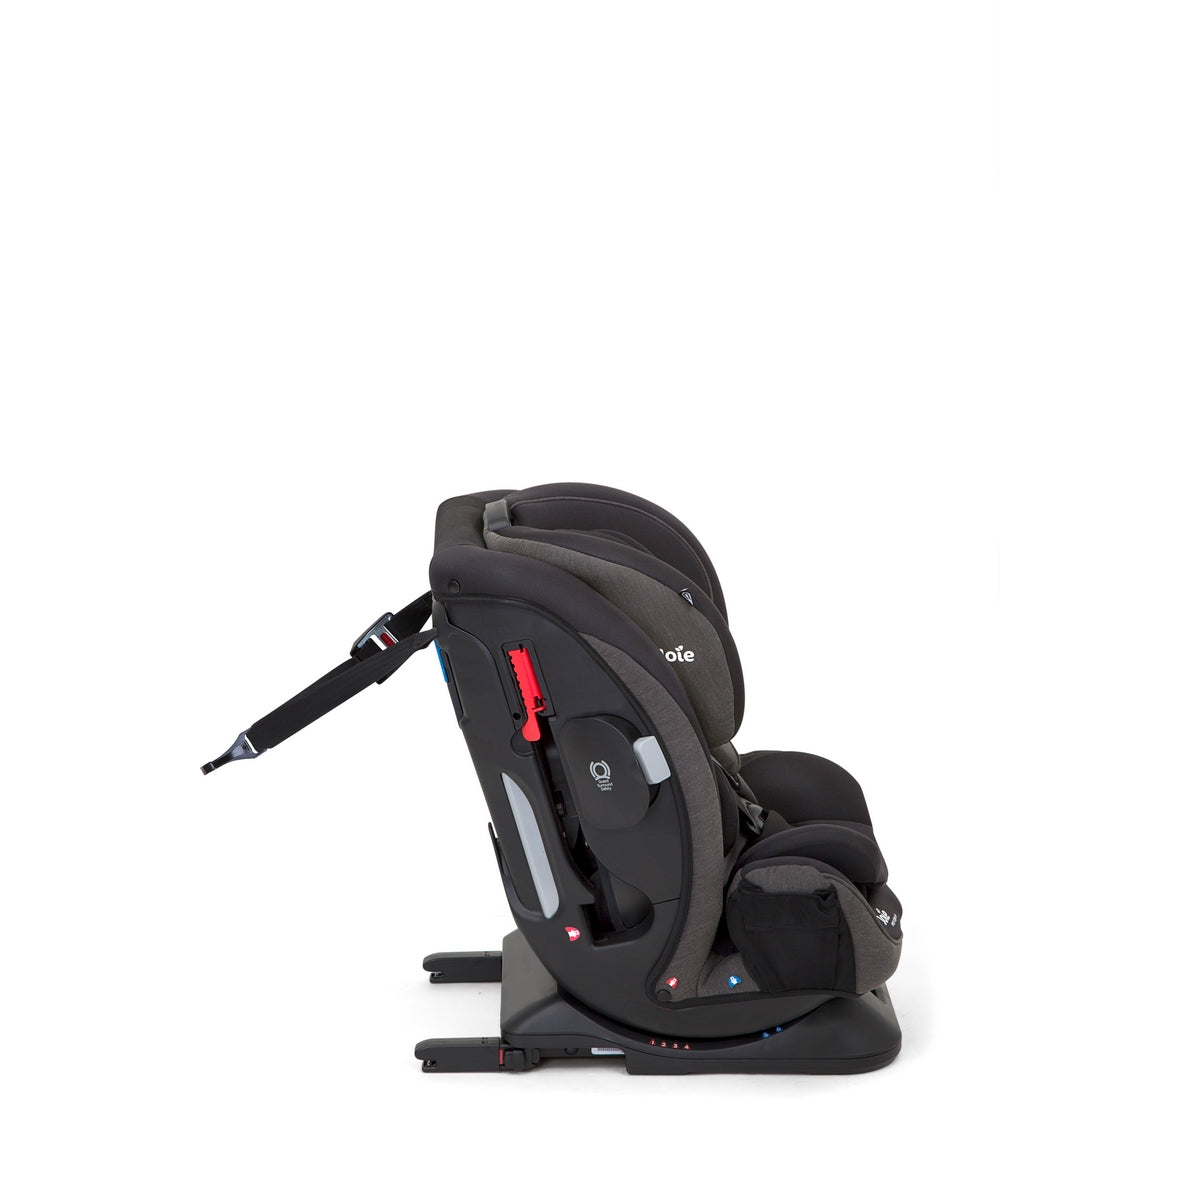 Joie Car seat Every Stage Fx Coal